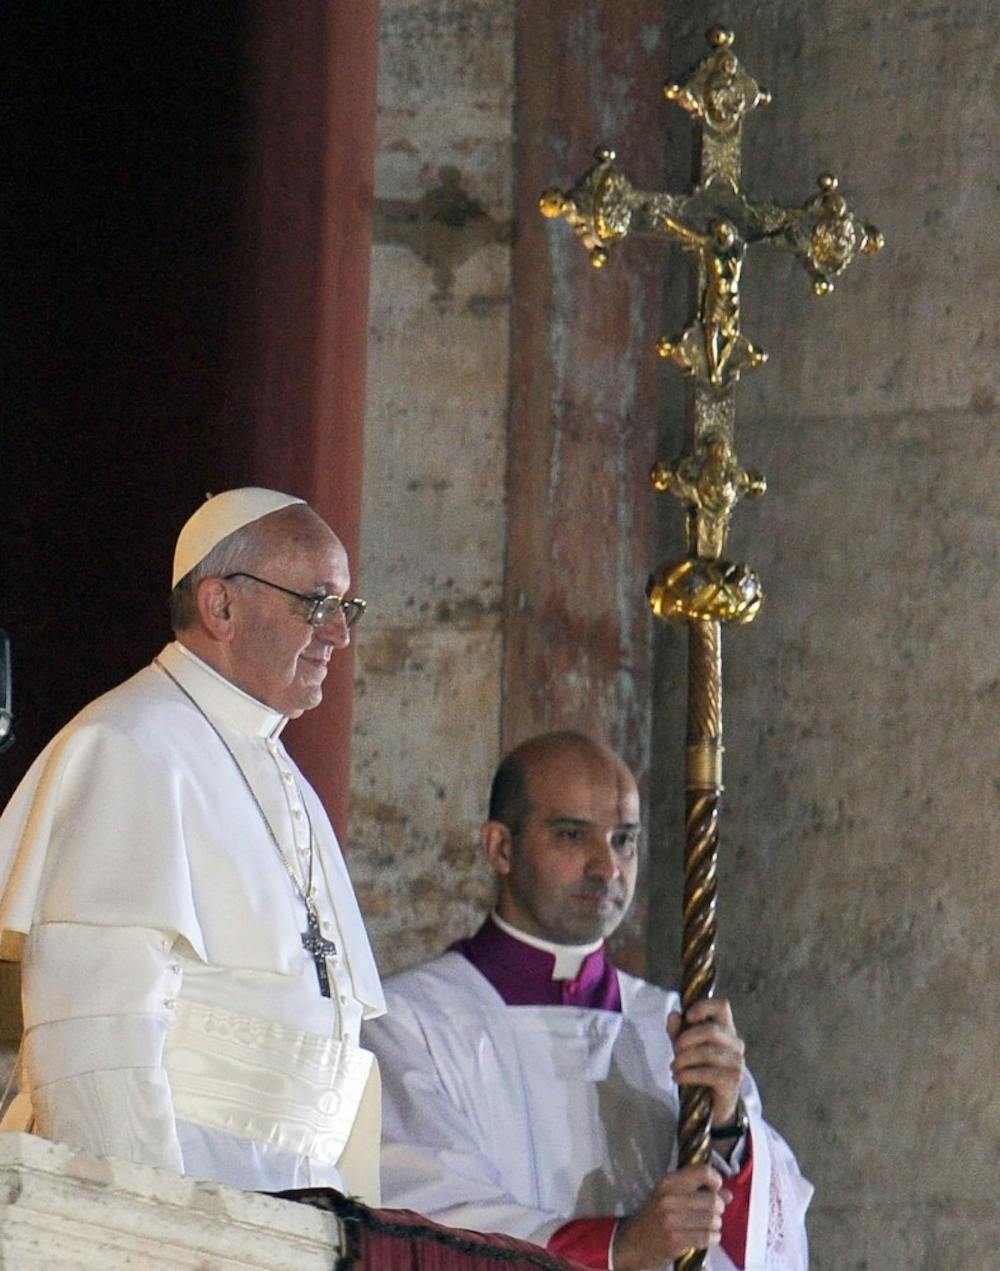 Church needs reform; time will tell if new pope does it